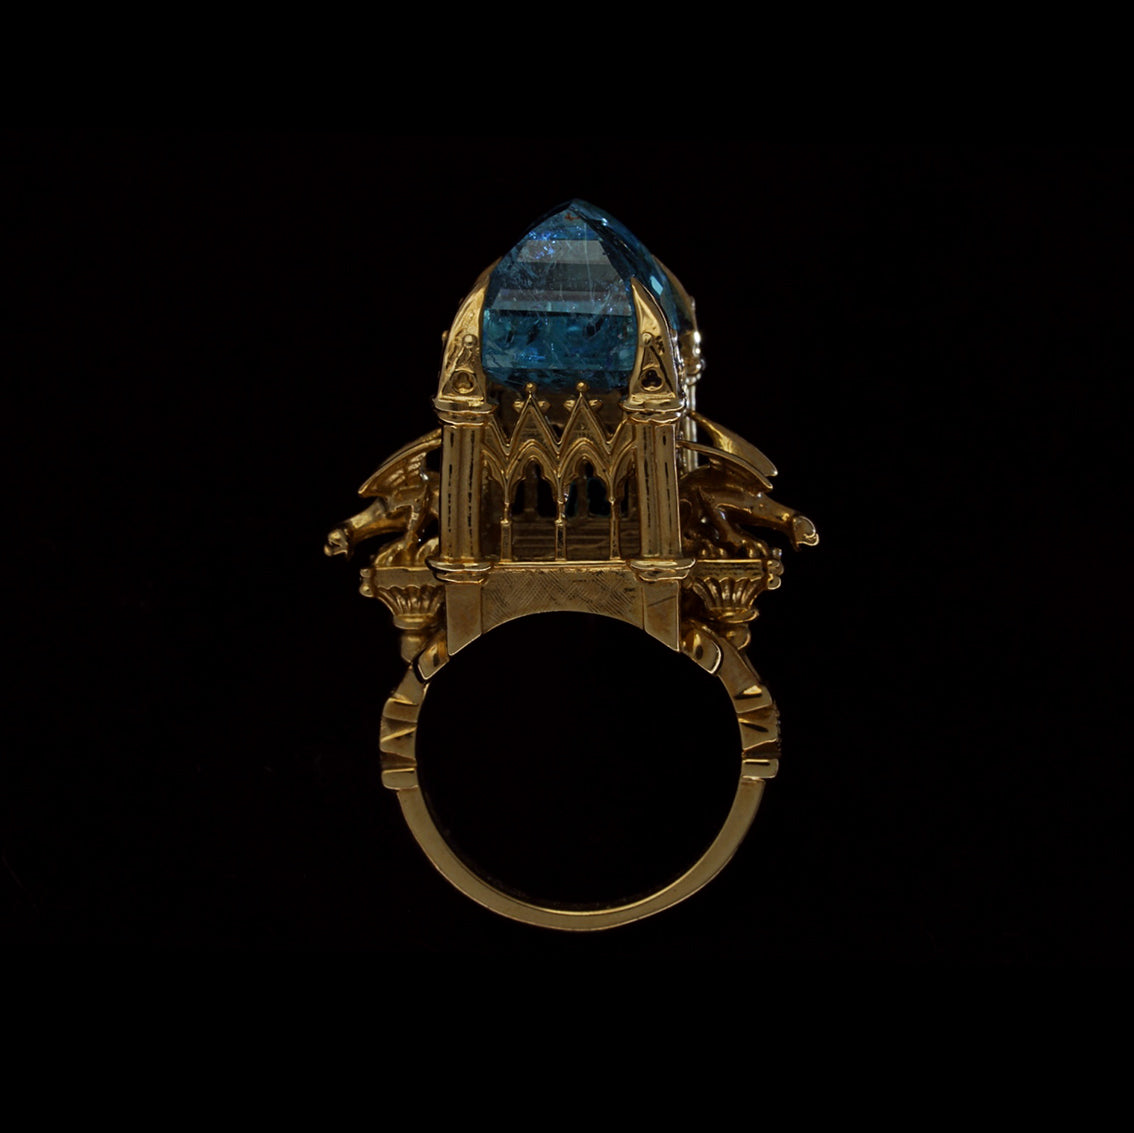 ALMIGHTY EMPRESS RING